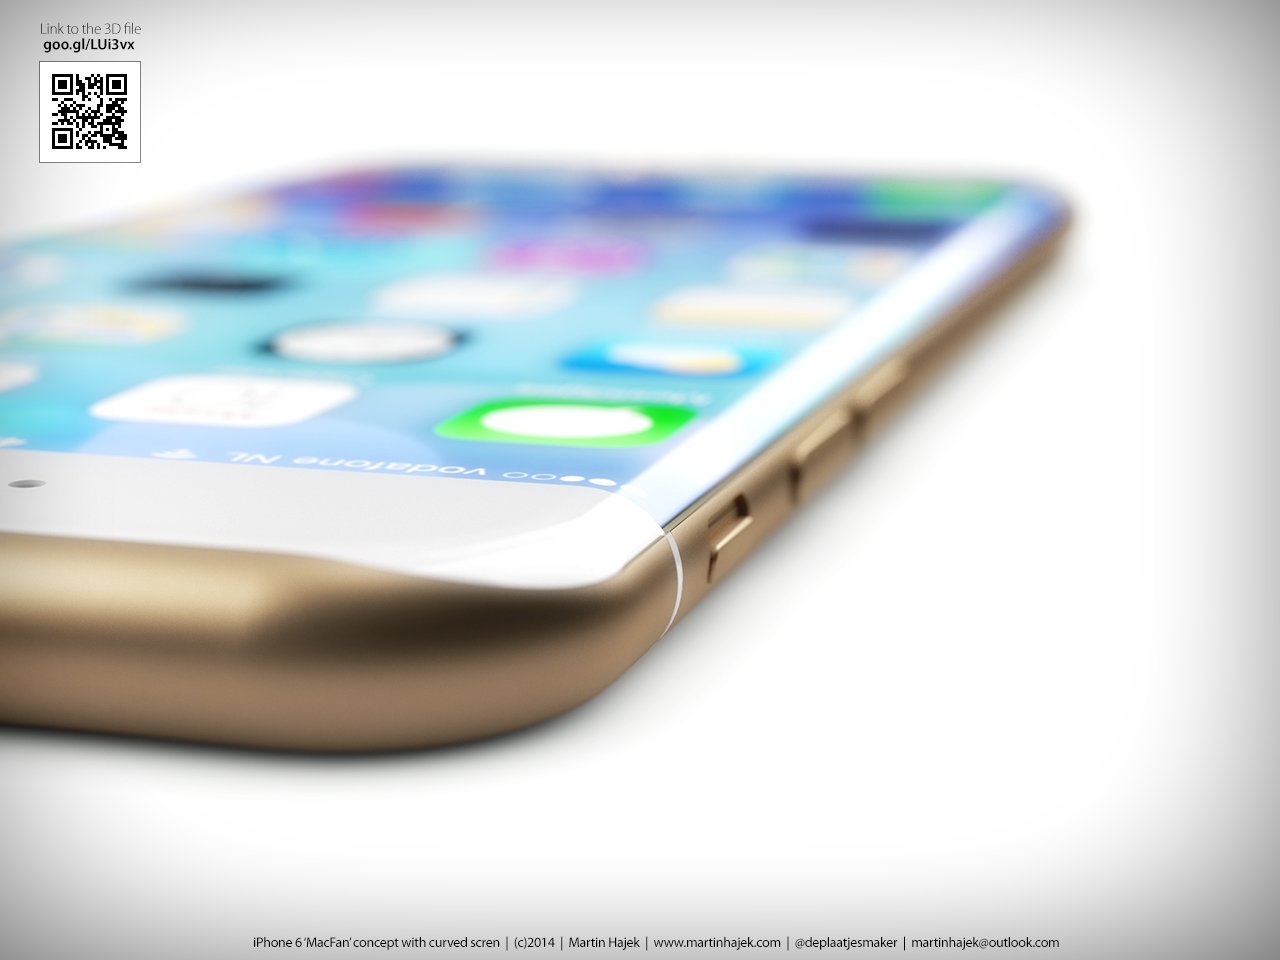 Apple will reportedly use Sapphire on the iPhone 6 displays and the iWatch. Concept - Martin Hajek.